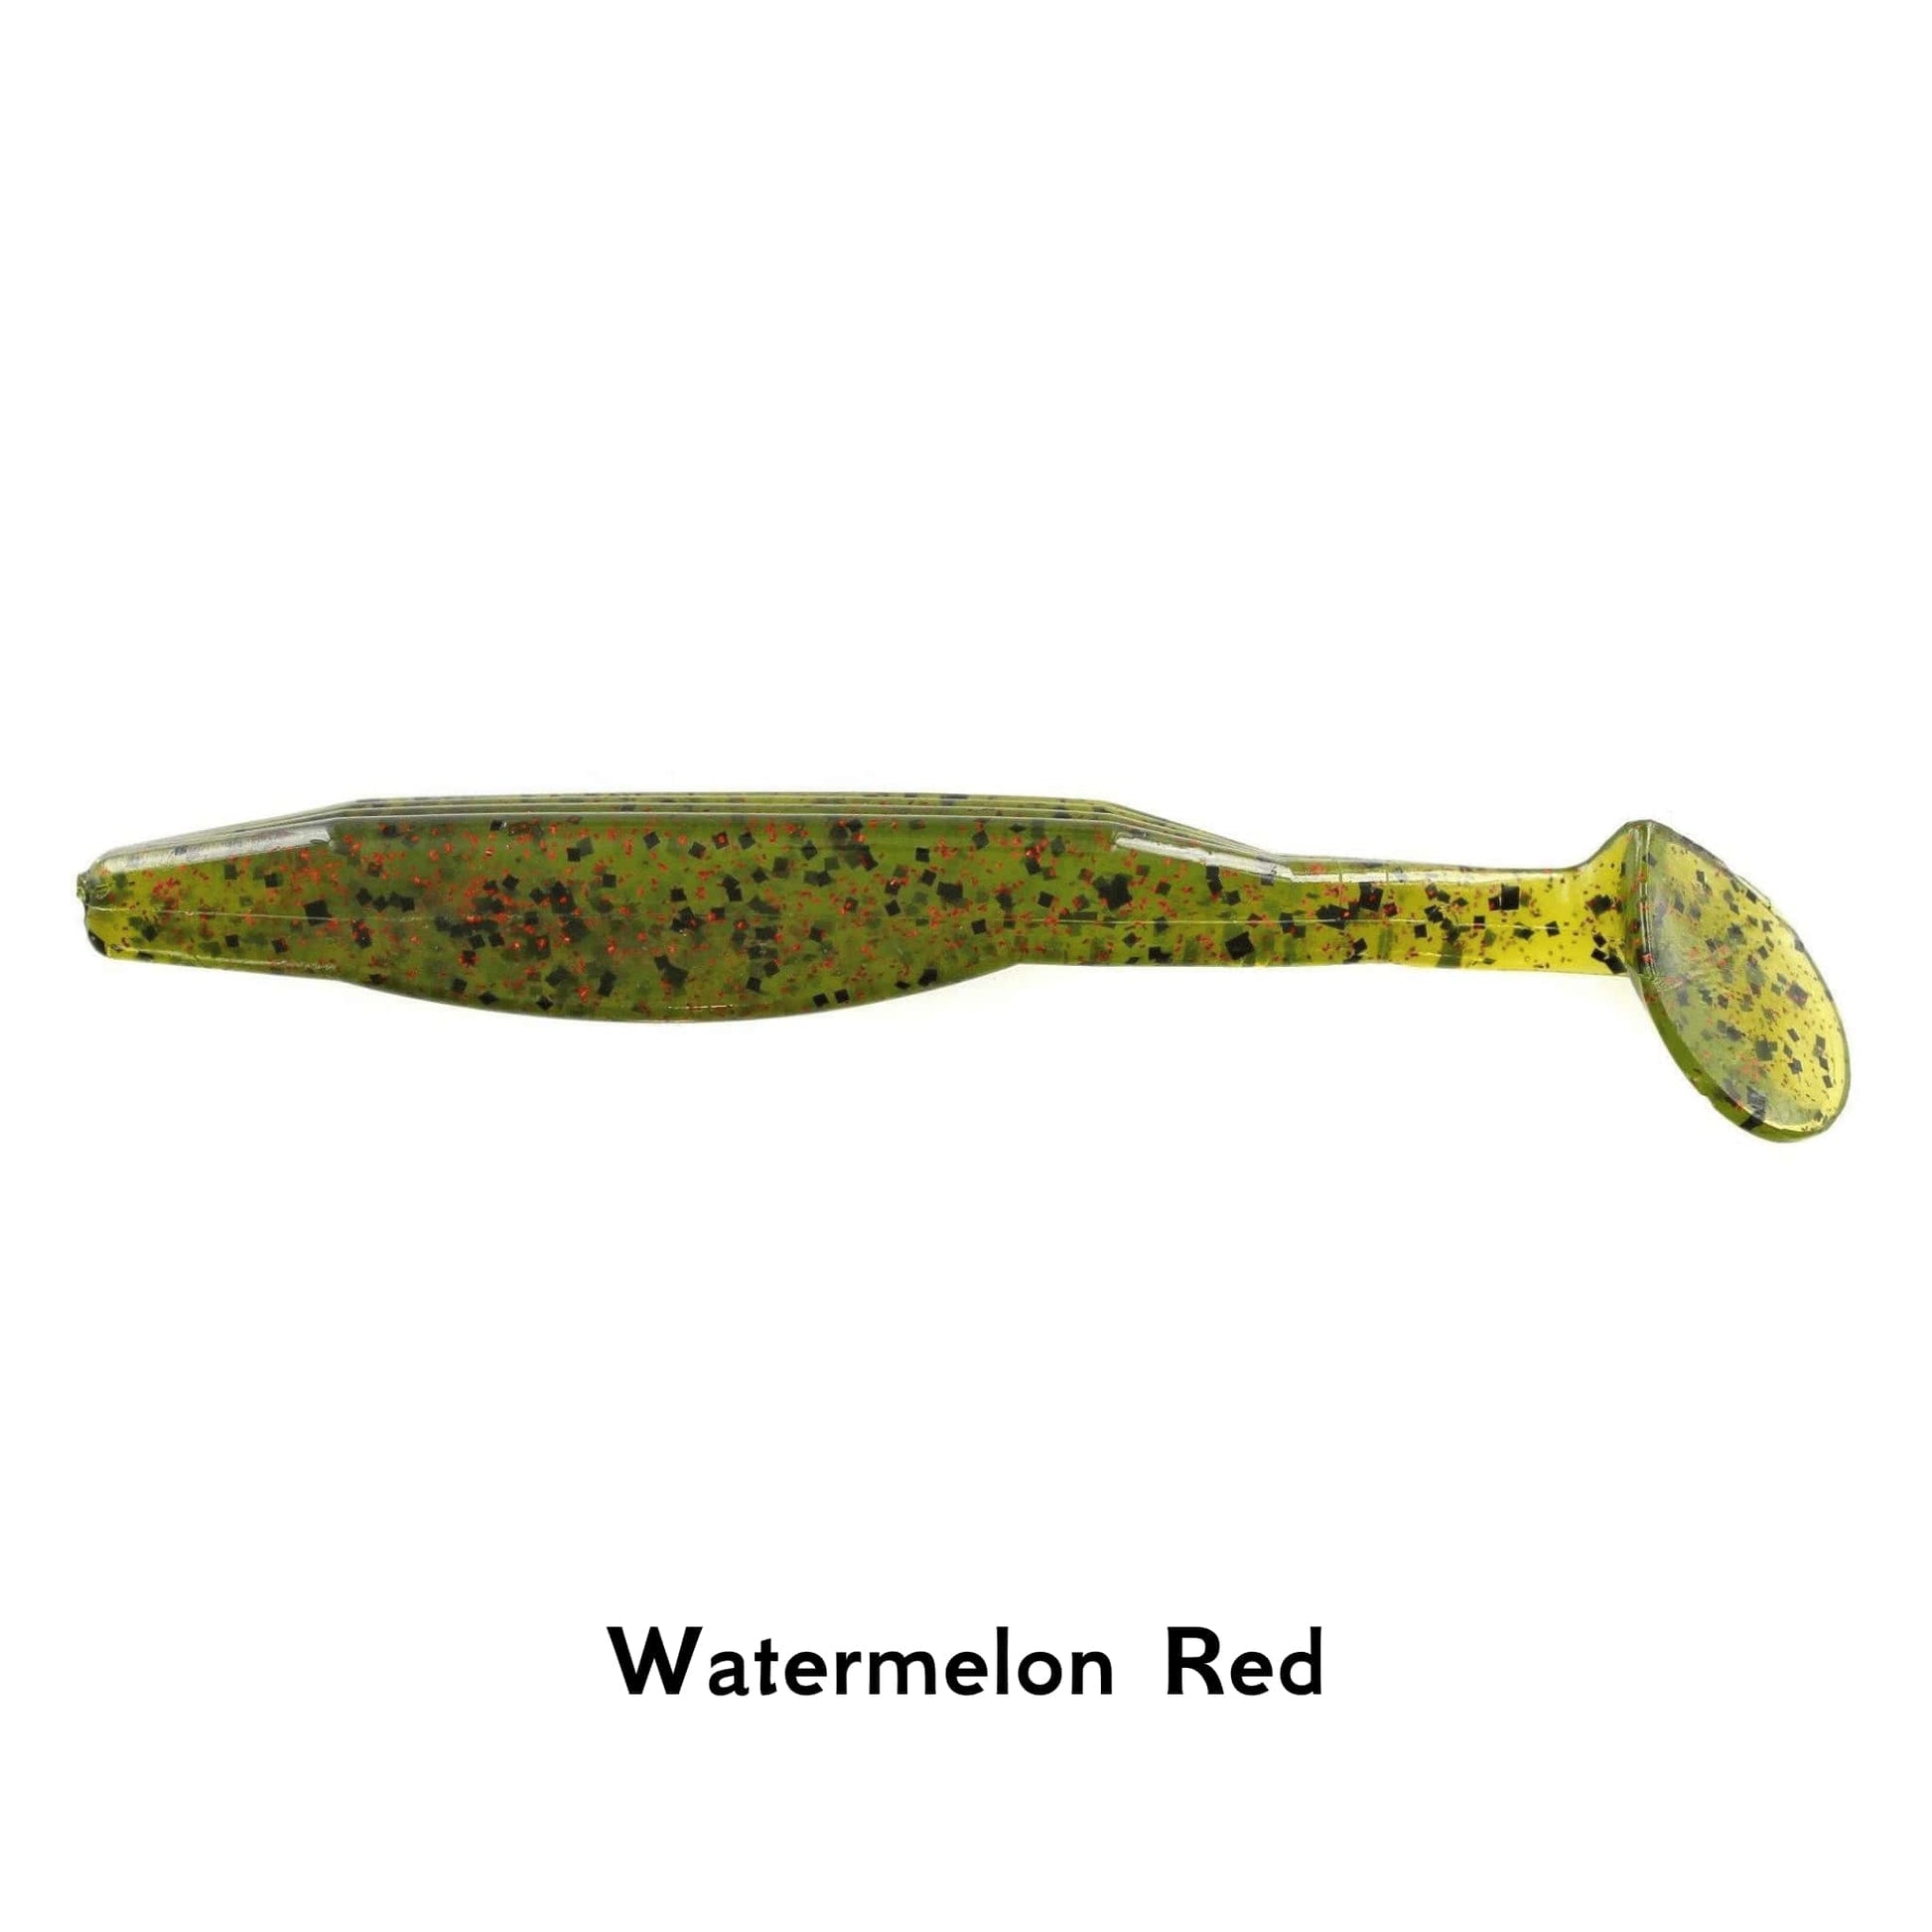 Zoom Swimmin Super Fluke Watermelon Red 4 Inch 5pcs Soft Bait Fishing Lure ALL COLOURS Paddle Tail Jig Dropshot Lure Texas Carolina Rig Cheb